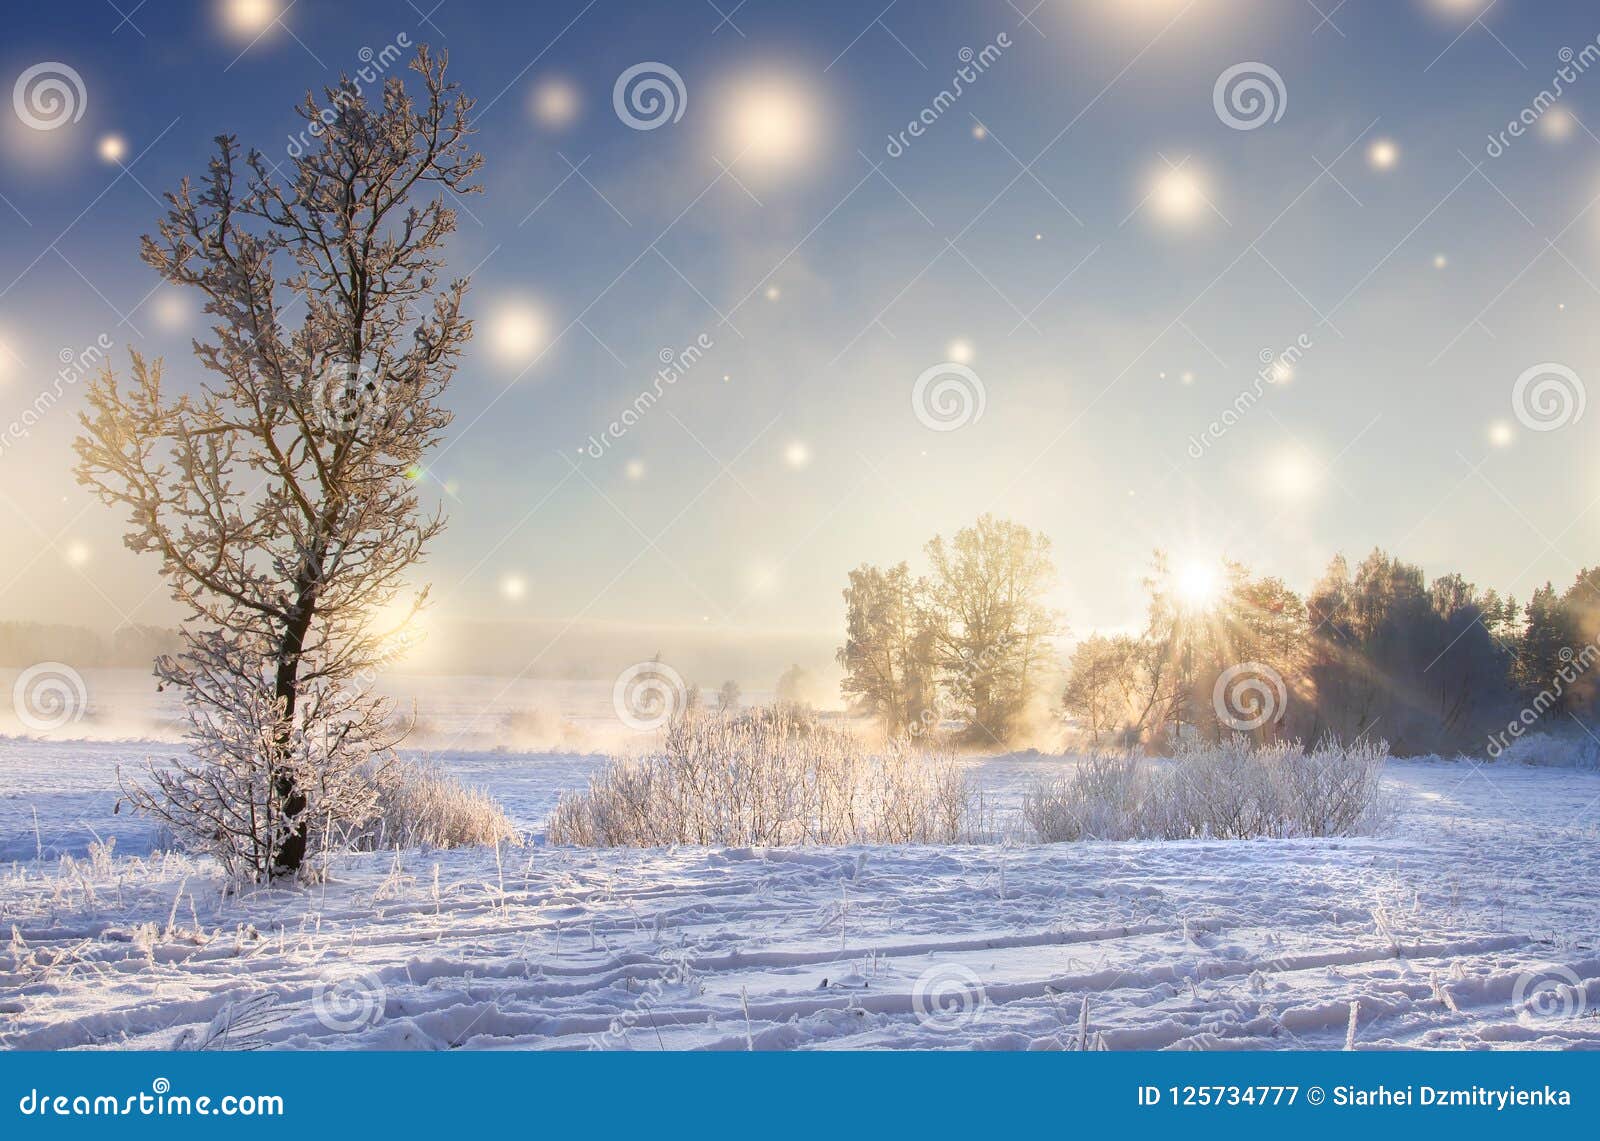 Christmas Background. Winter Nature Landscape on Sunny Morning with Magic Glowing Snowflakes. Shine of Lights on Stock Image - Image of snowfall, blue: